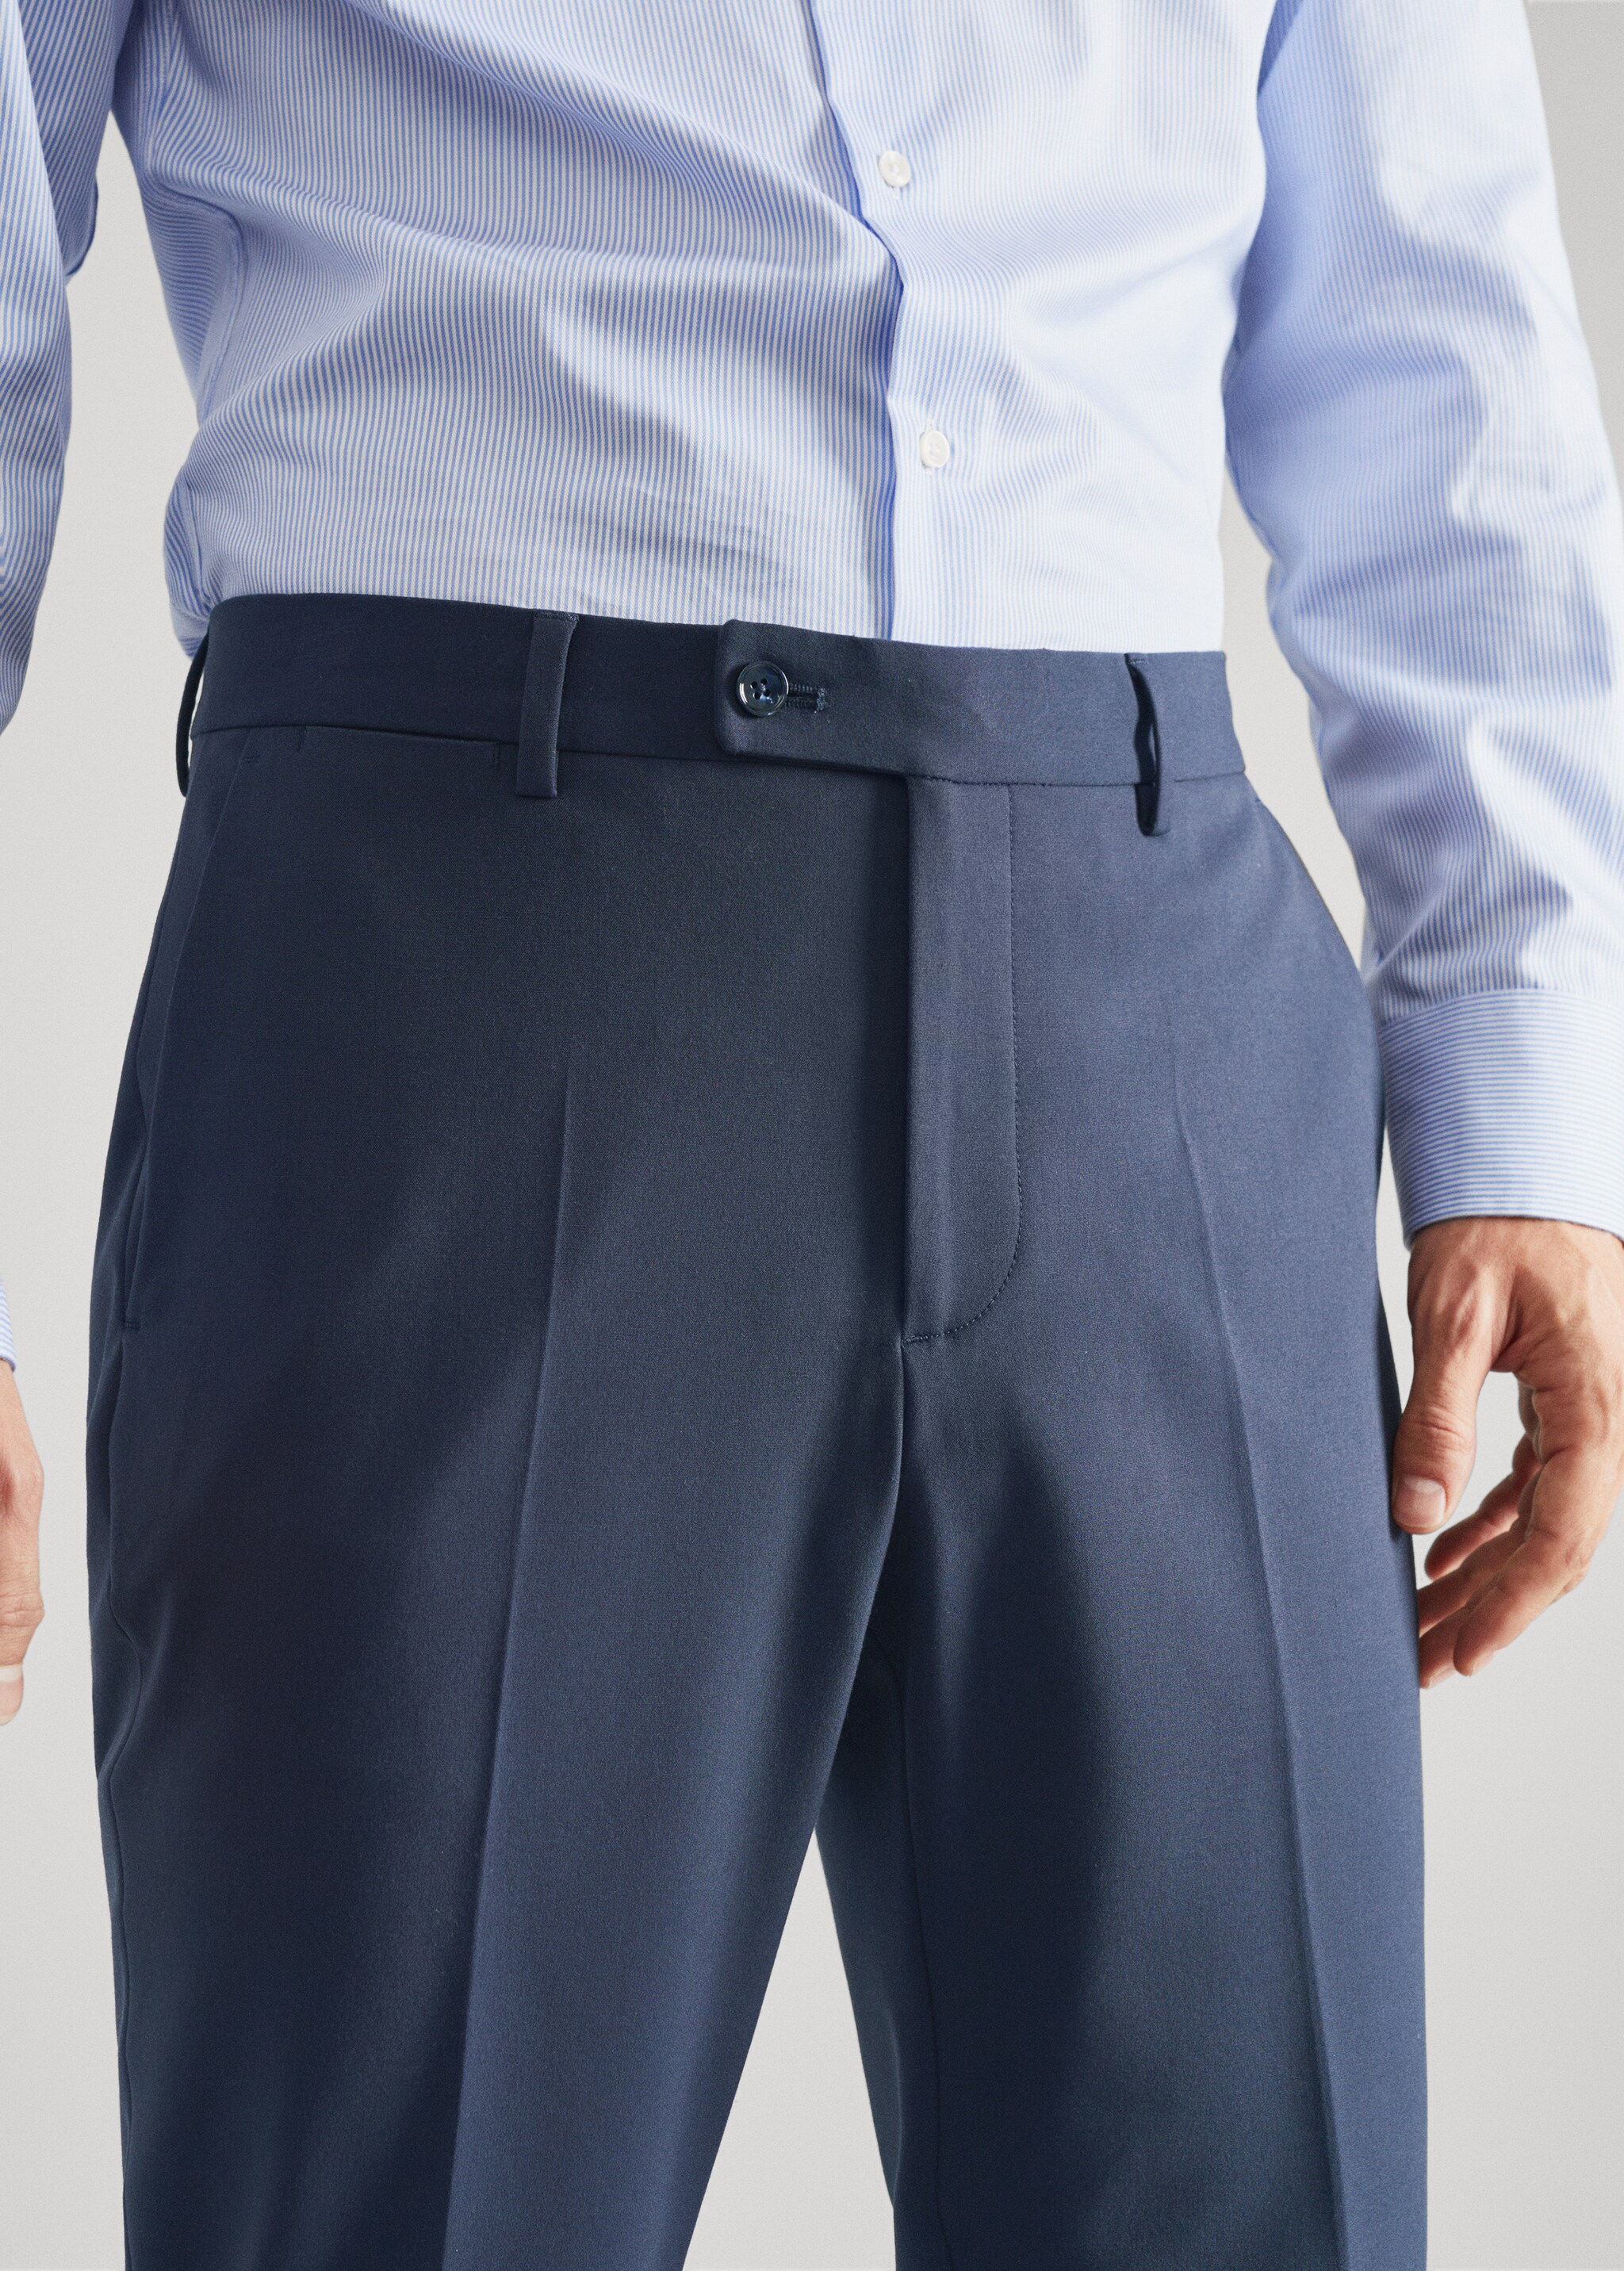  Suit trousers - Details of the article 1